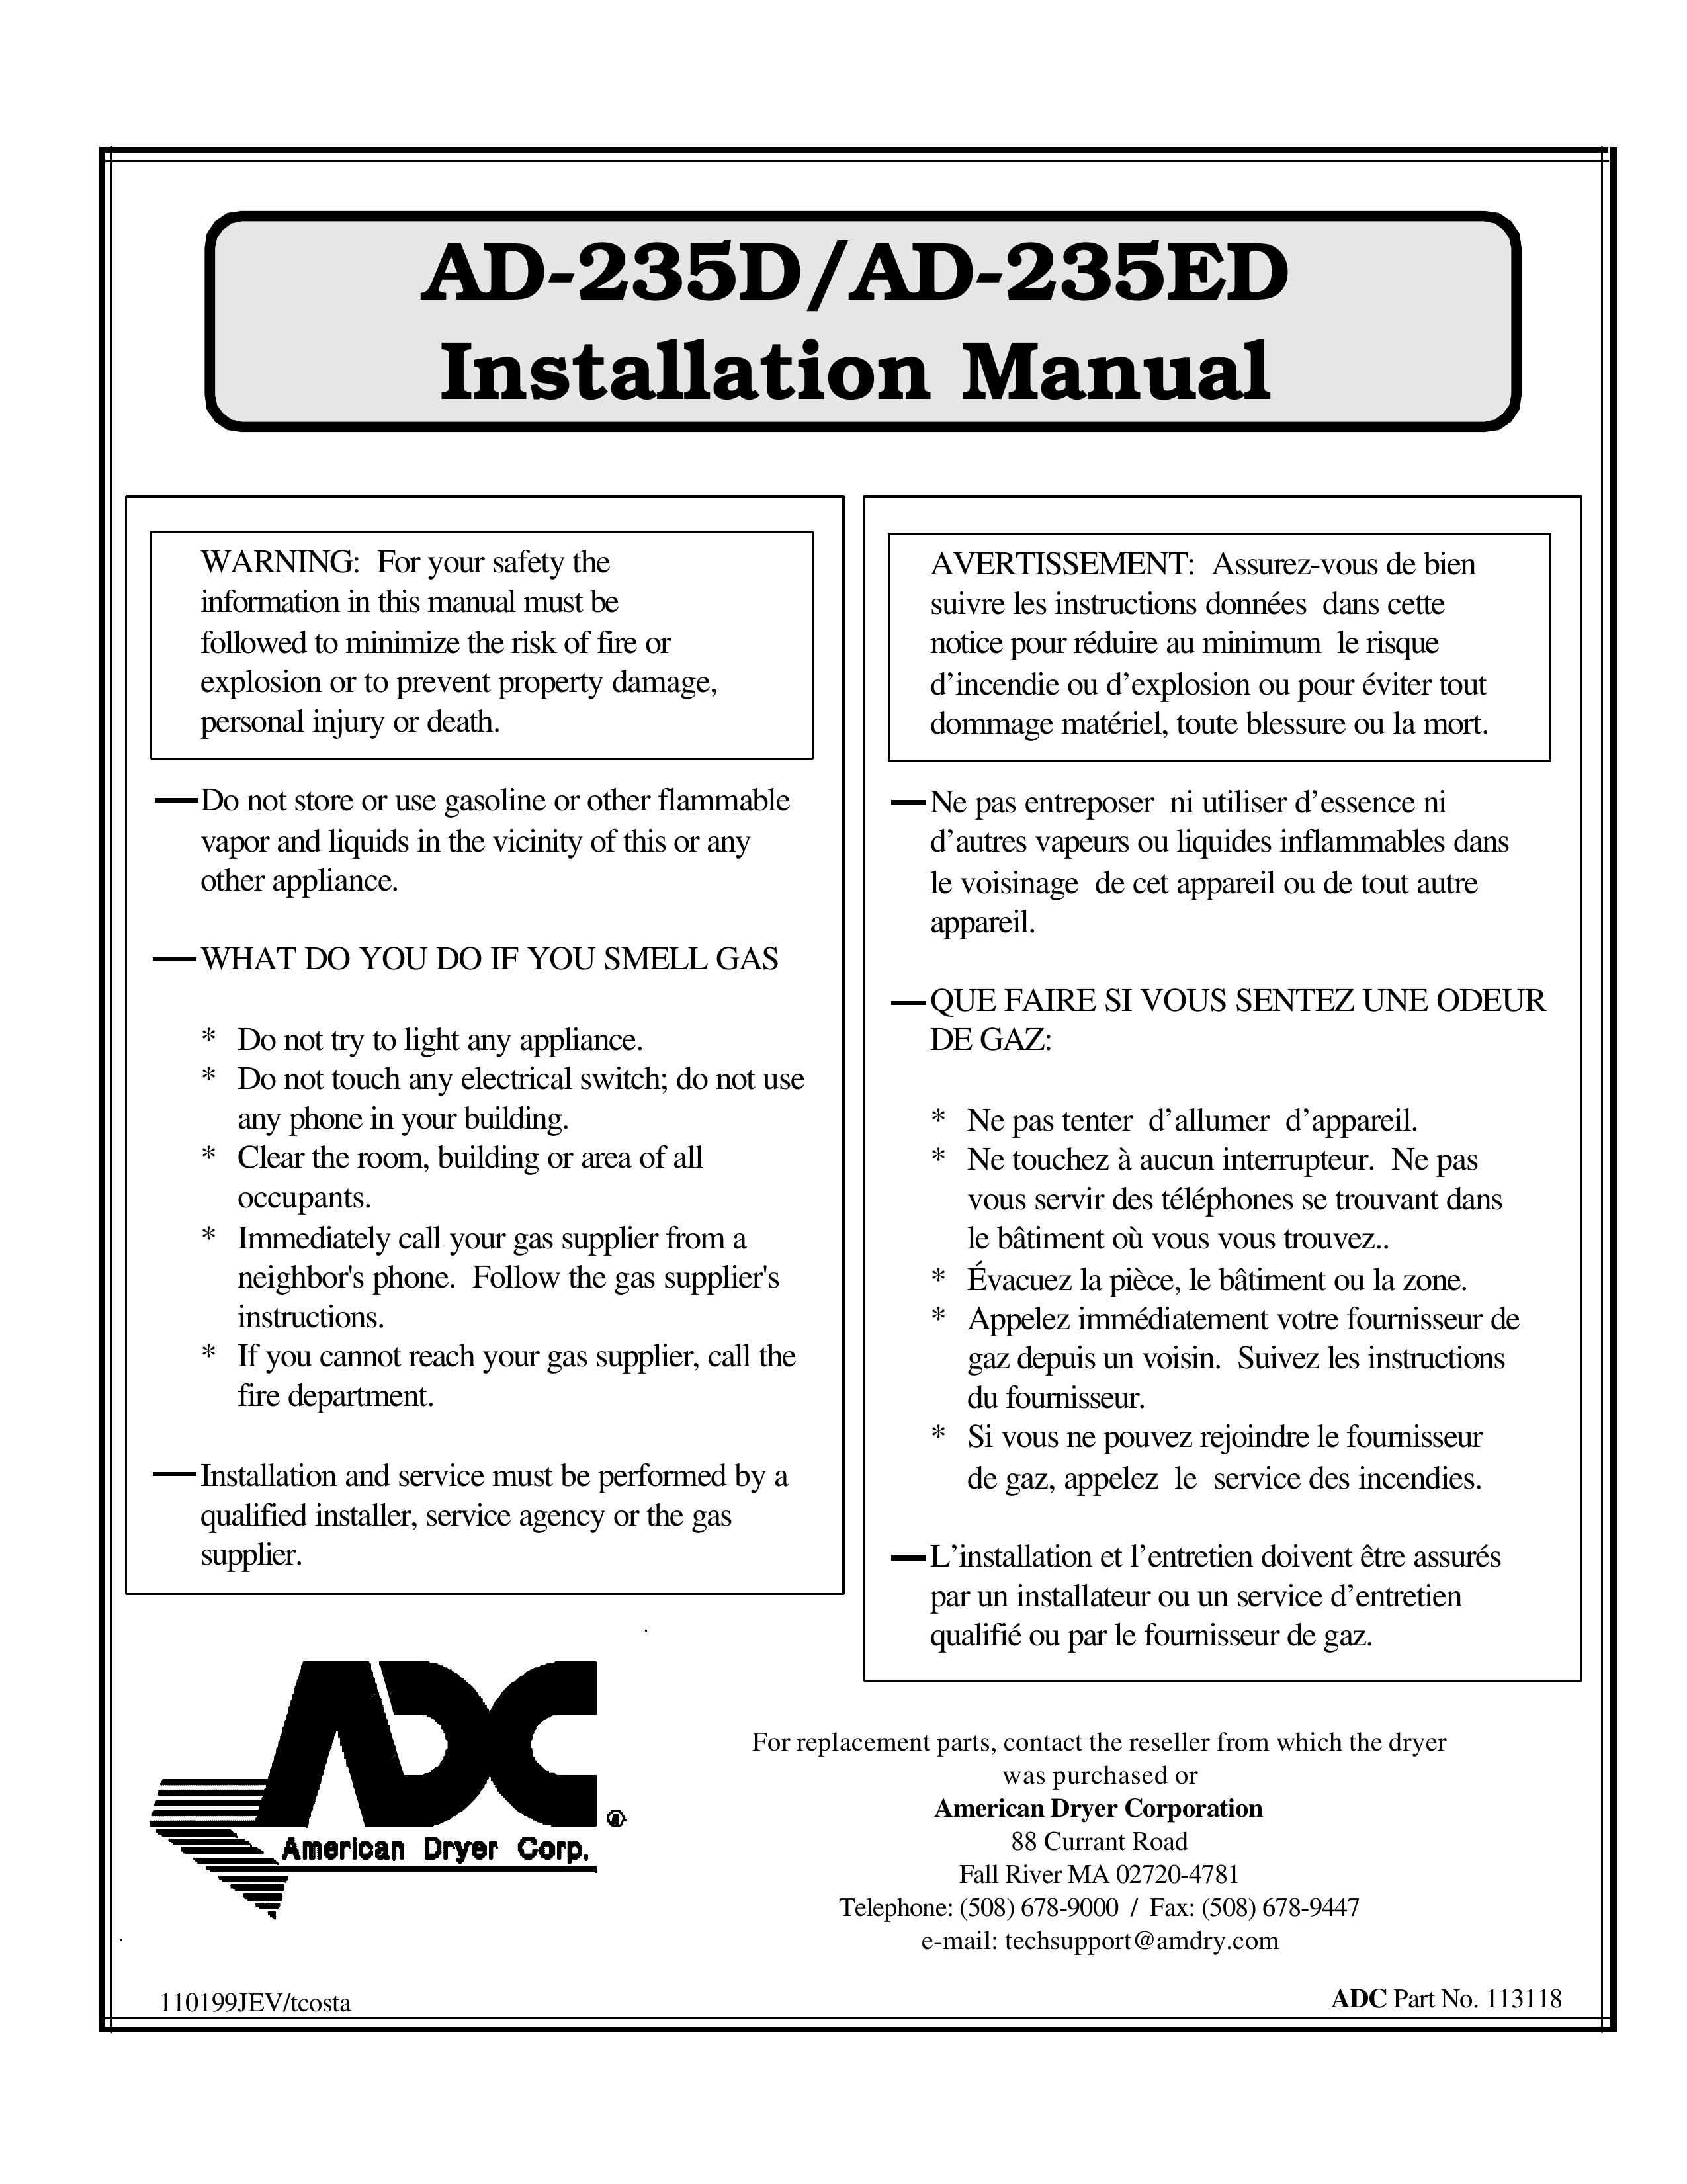 American Dryer Corp. AD-235ED Clothes Dryer User Manual